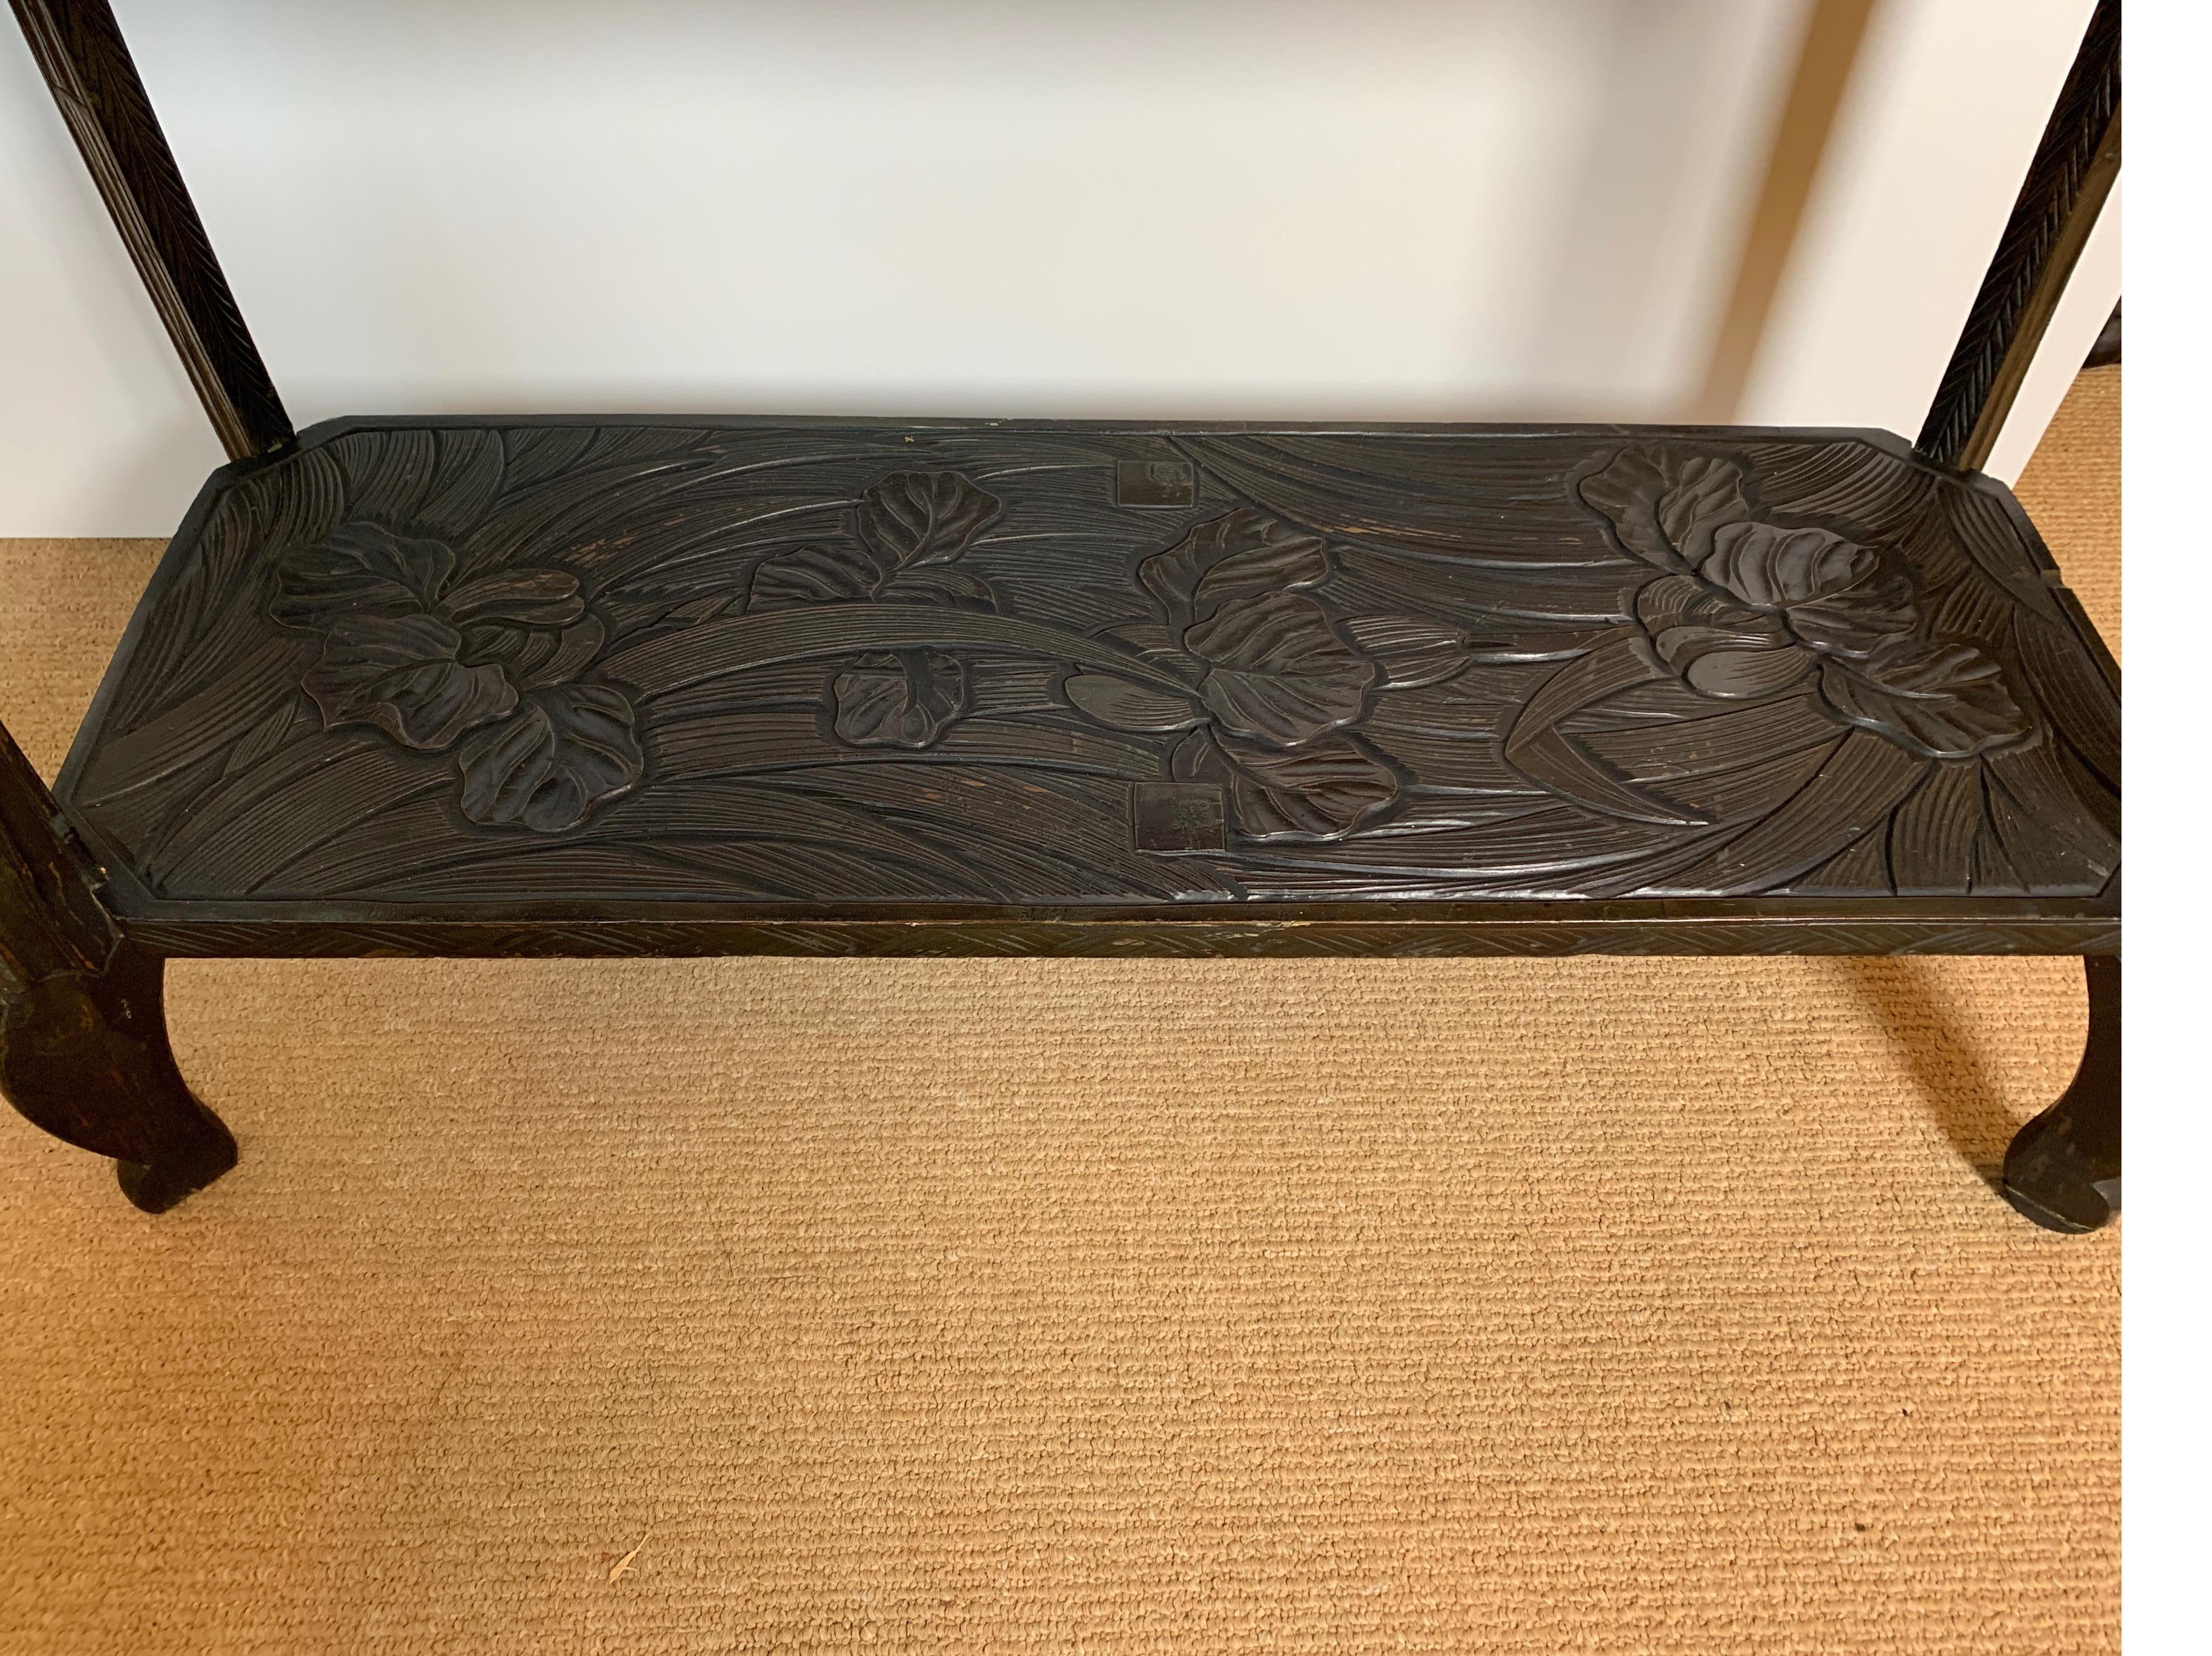 Exceptional Japanese botanical hand carved three tier shelf, circa 1905- Art Nouveau period. The dark finish is almost ebonized with slight wear to the original finish. Masterfully carved and well cared for.